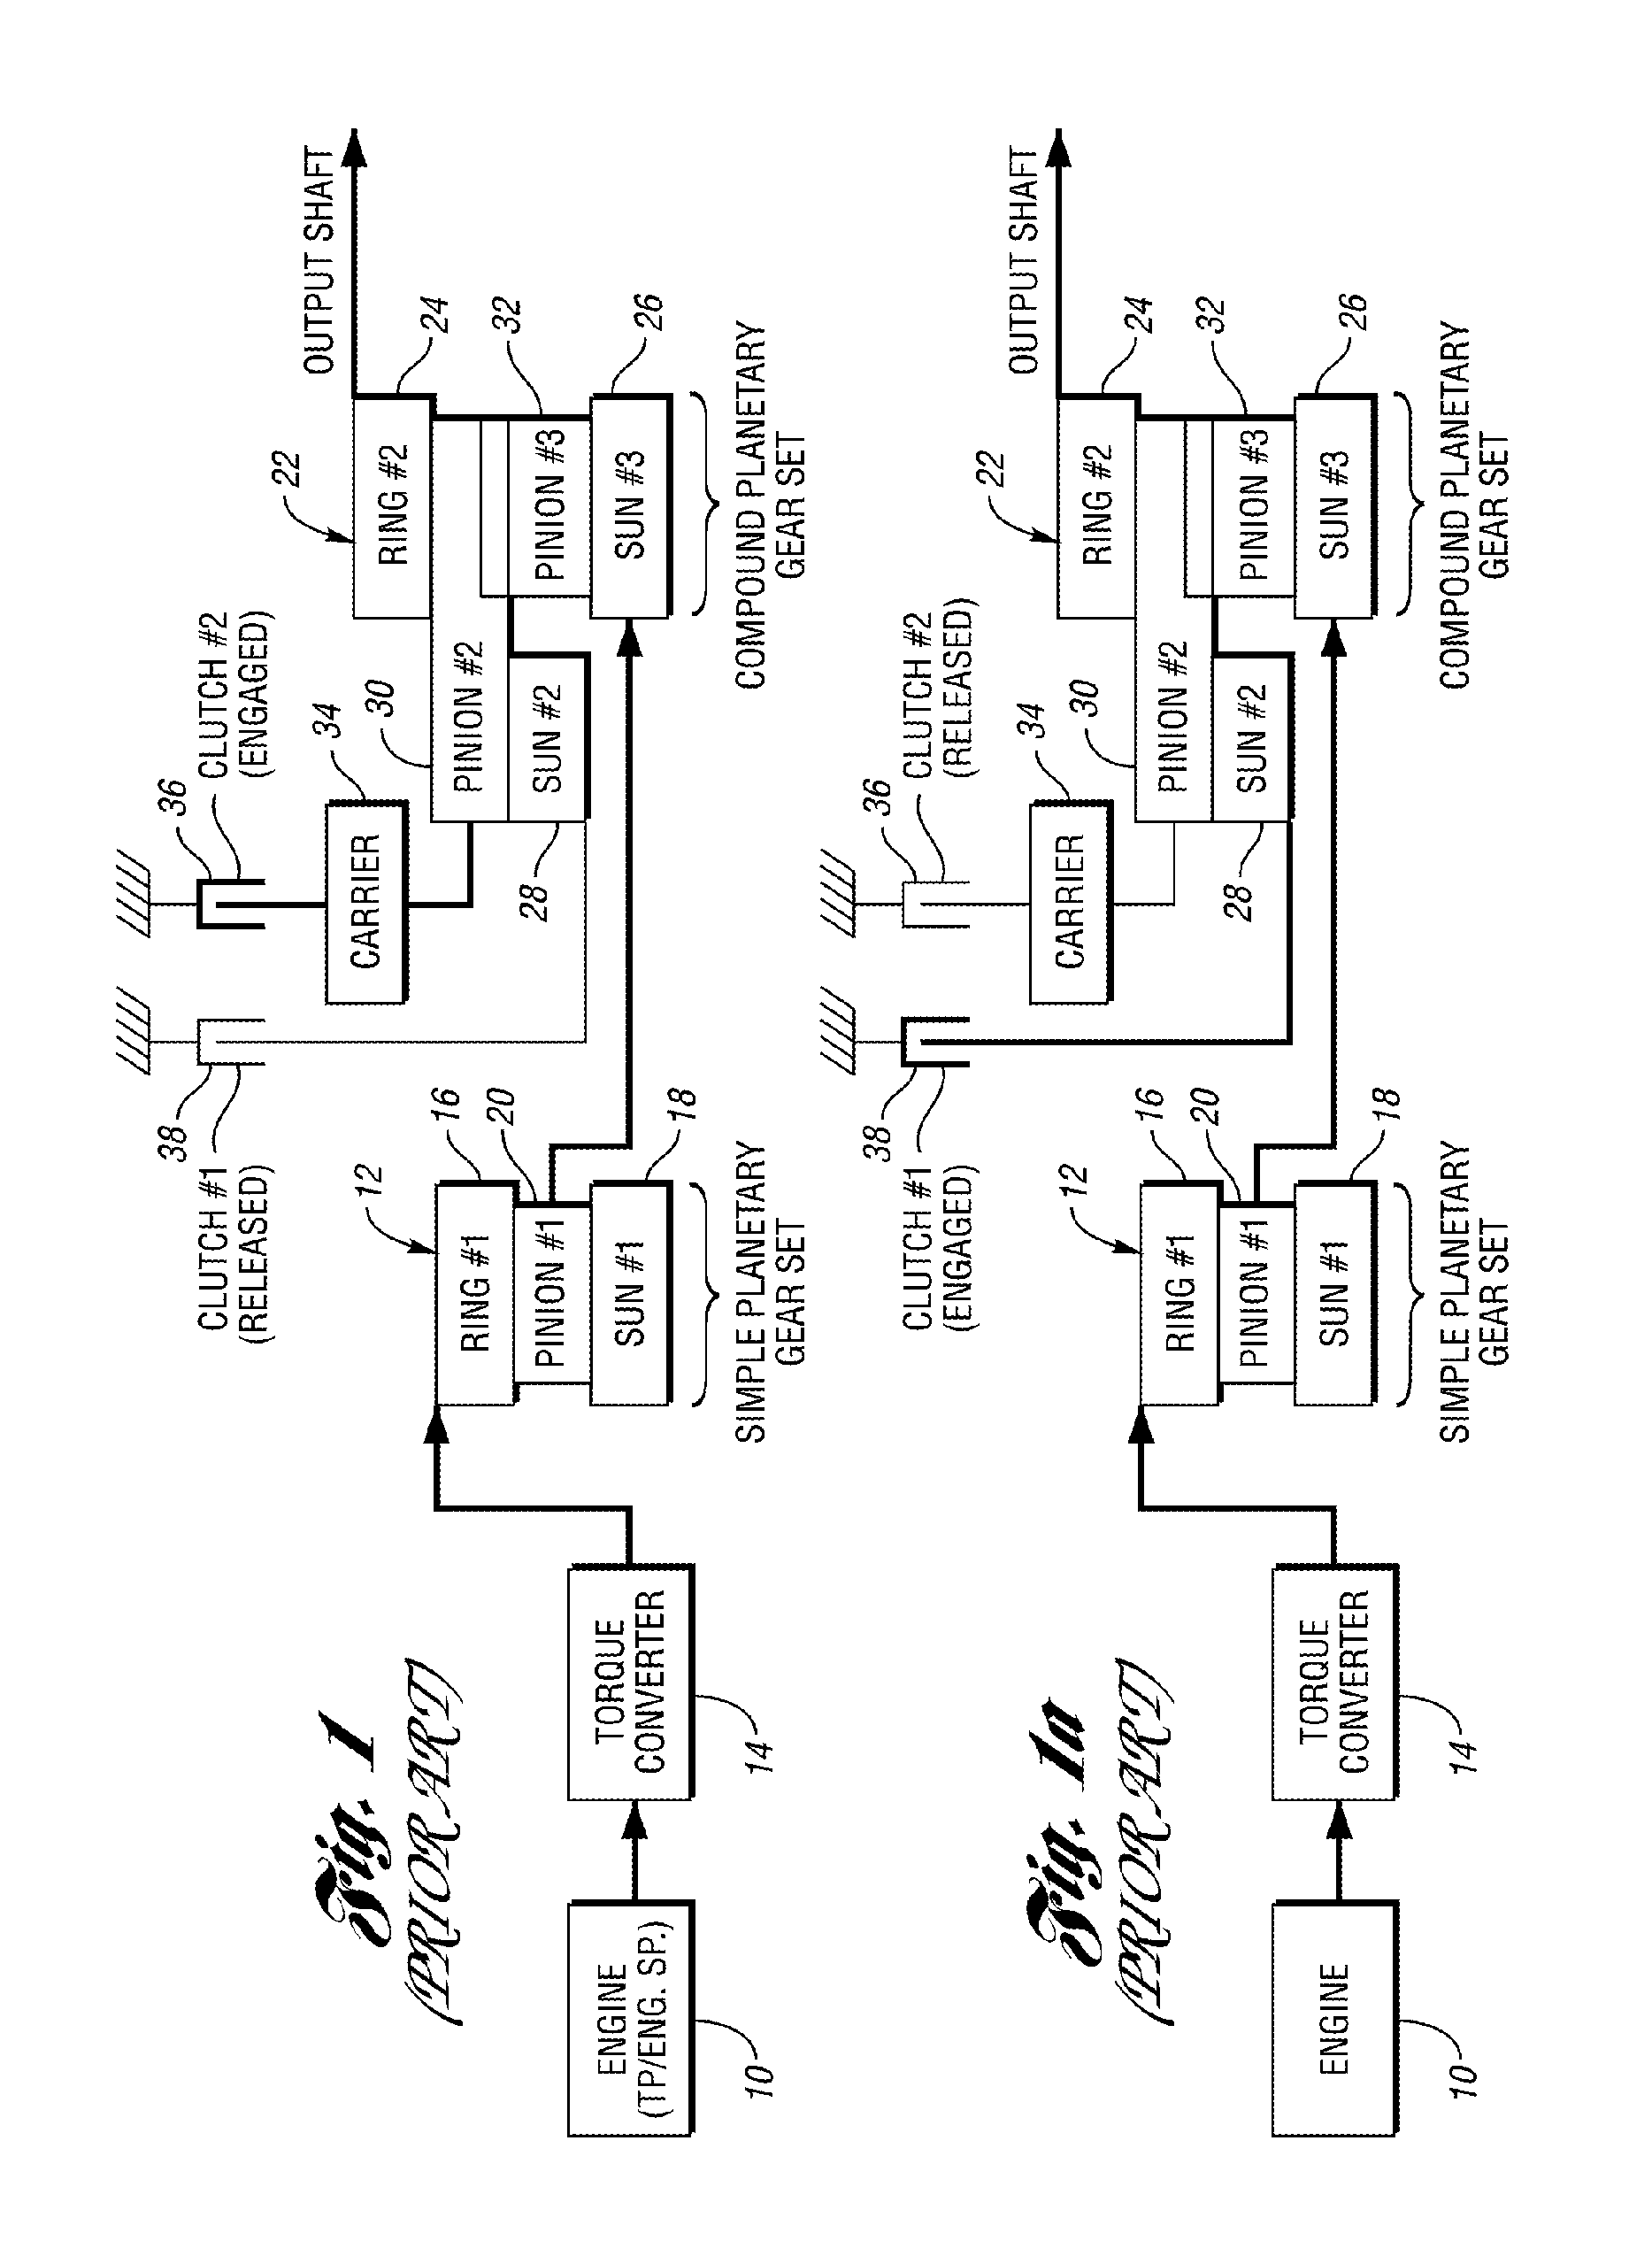 Ratio shift control for a multiple ratio automatic transmission